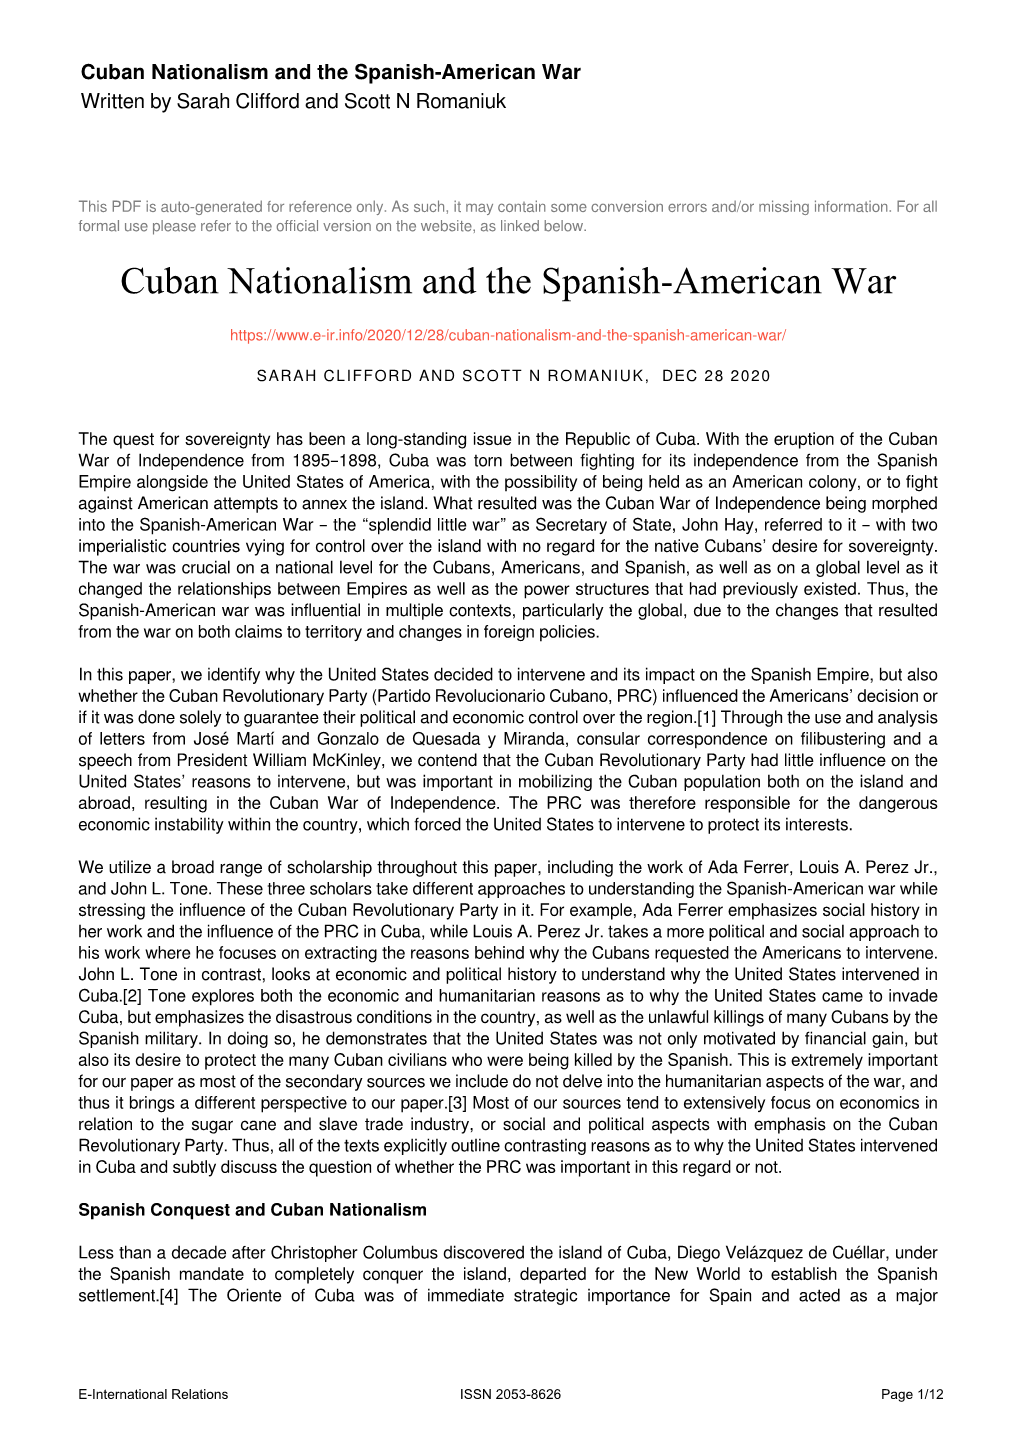 Cuban Nationalism and the Spanish-American War Written by Sarah Clifford and Scott N Romaniuk